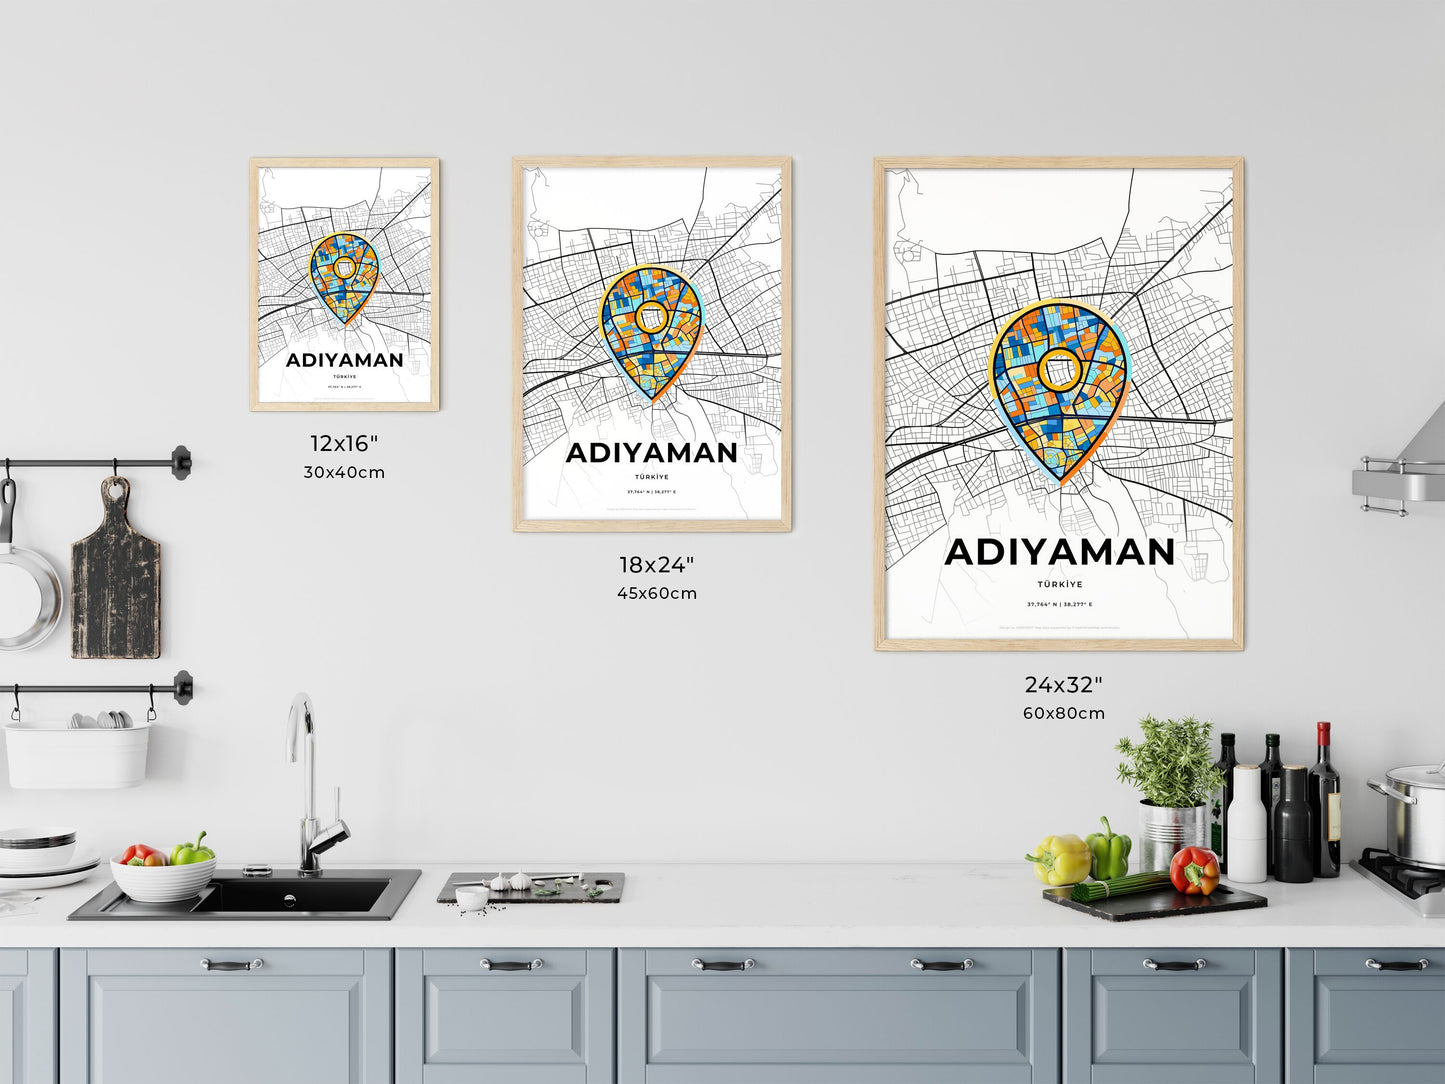 ADIYAMAN TURKEY minimal art map with a colorful icon. Where it all began, Couple map gift.